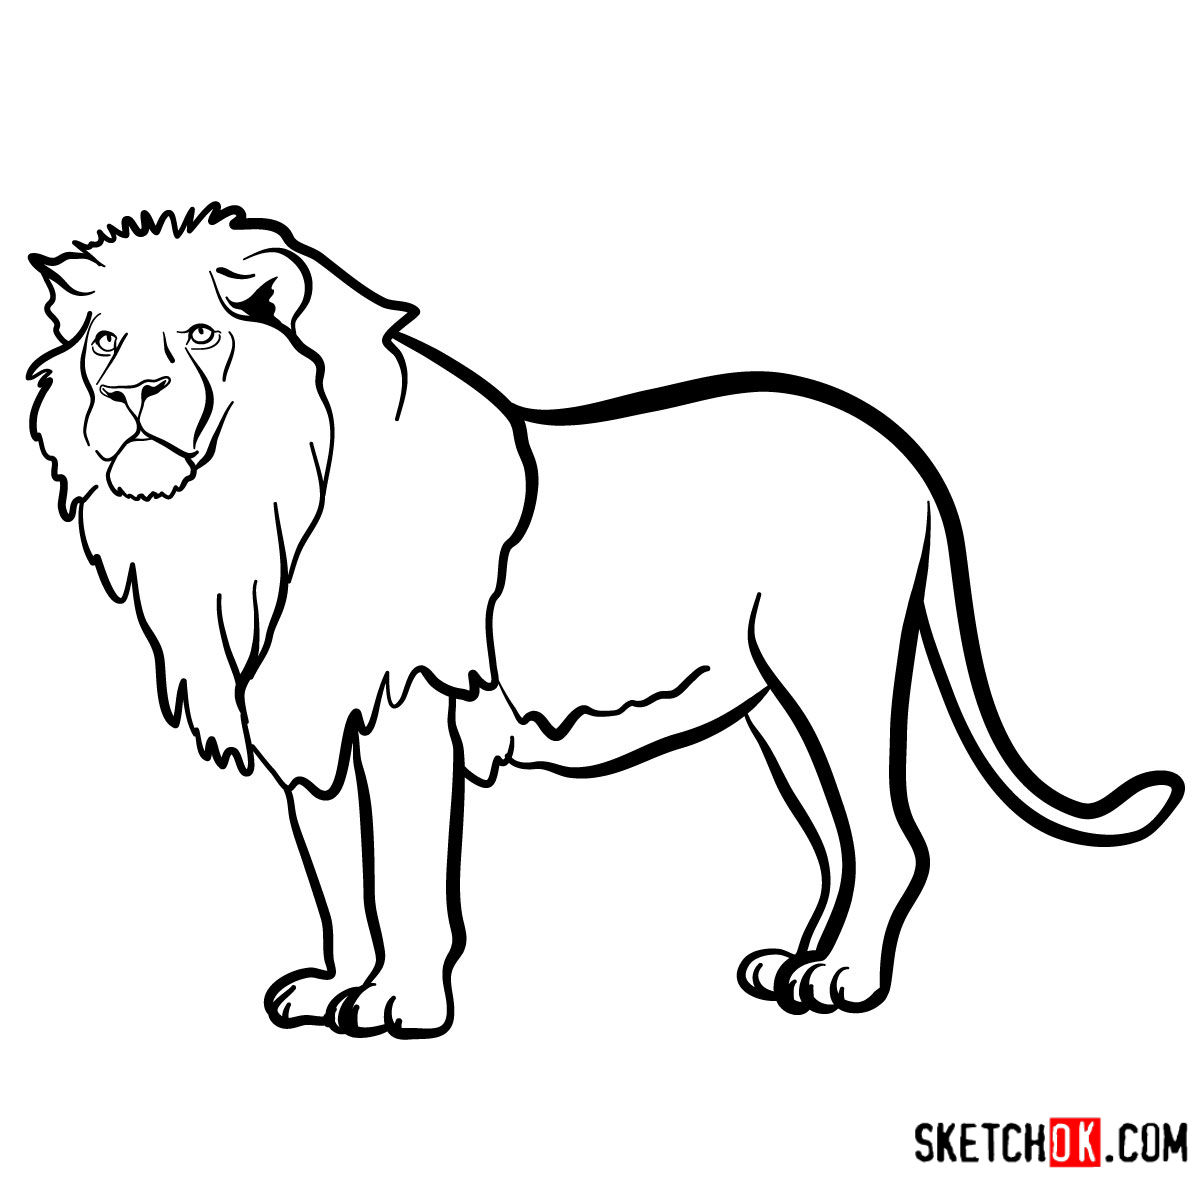 How to draw a Lion standing | Wild Animals - Sketchok easy drawing ...